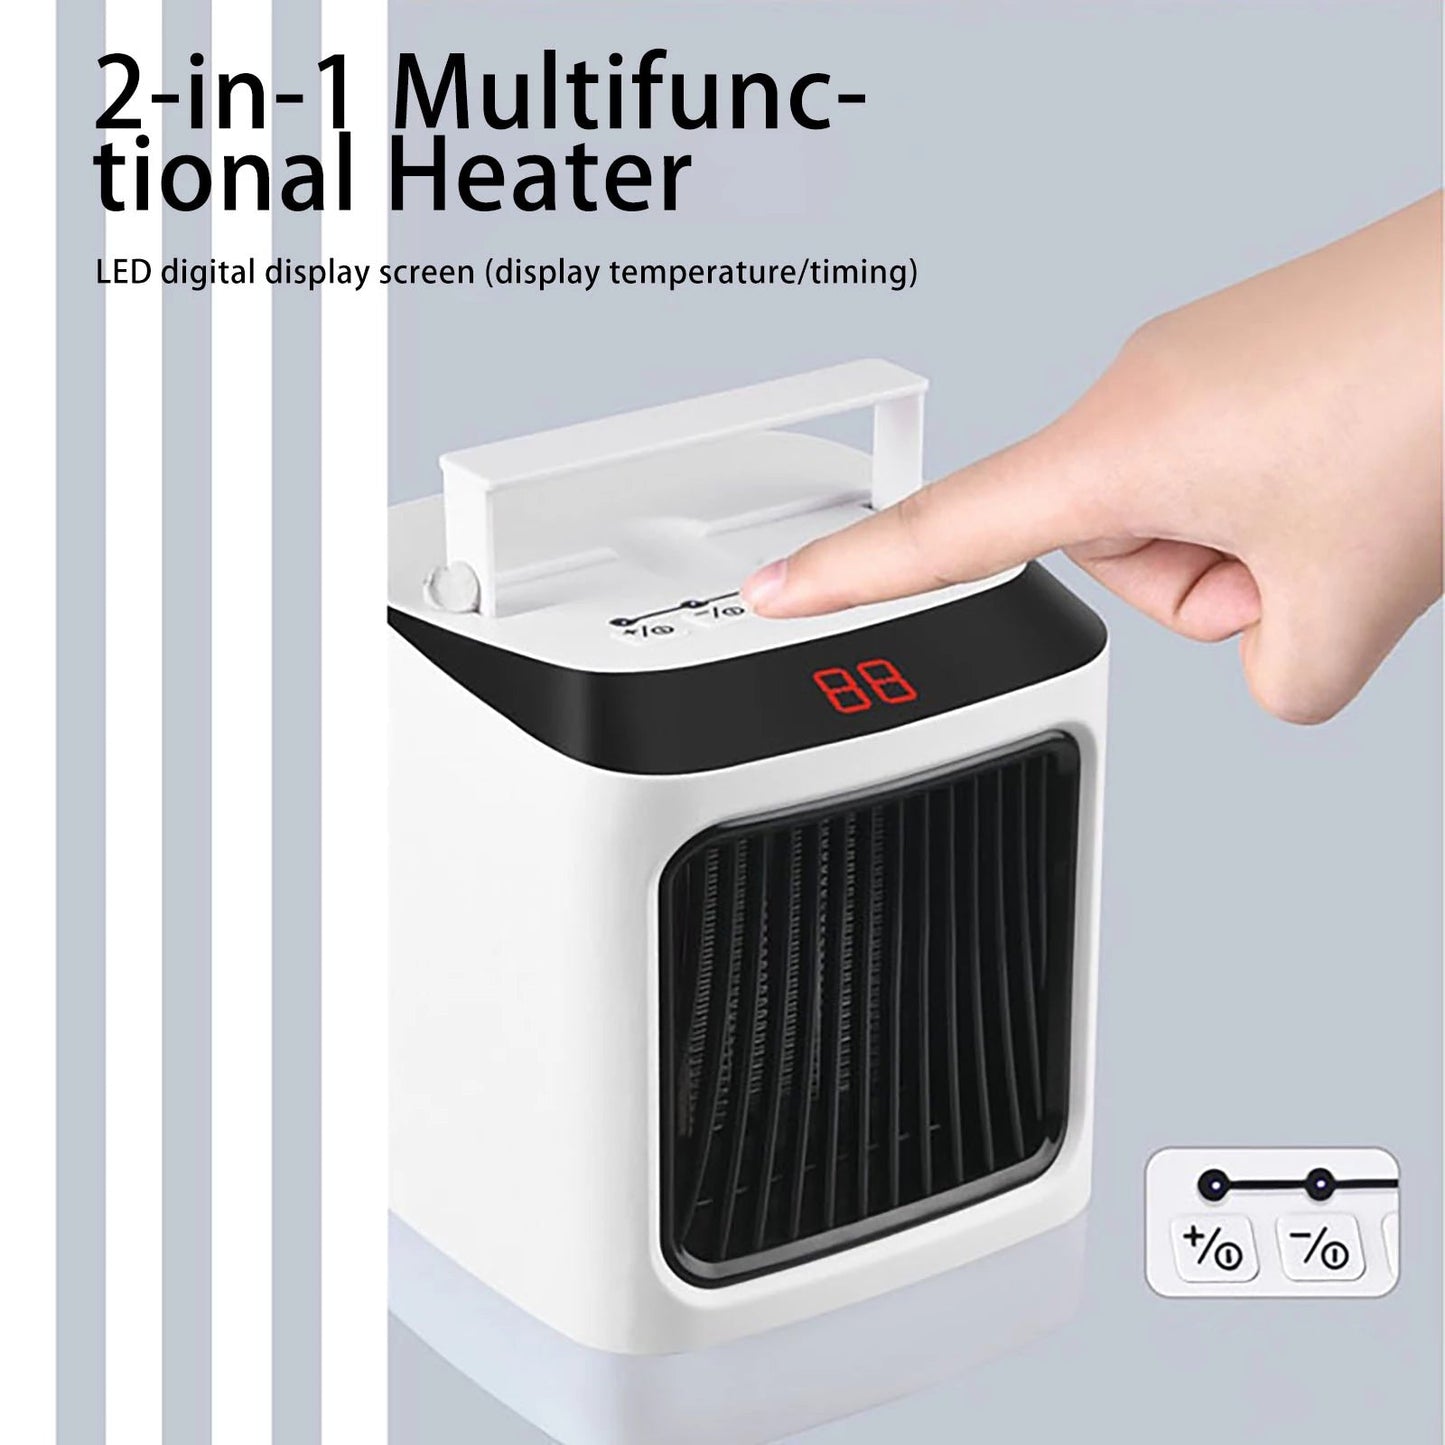 Relaxin Products Premium Portable 2-in-1 Space Heater and Cooler.